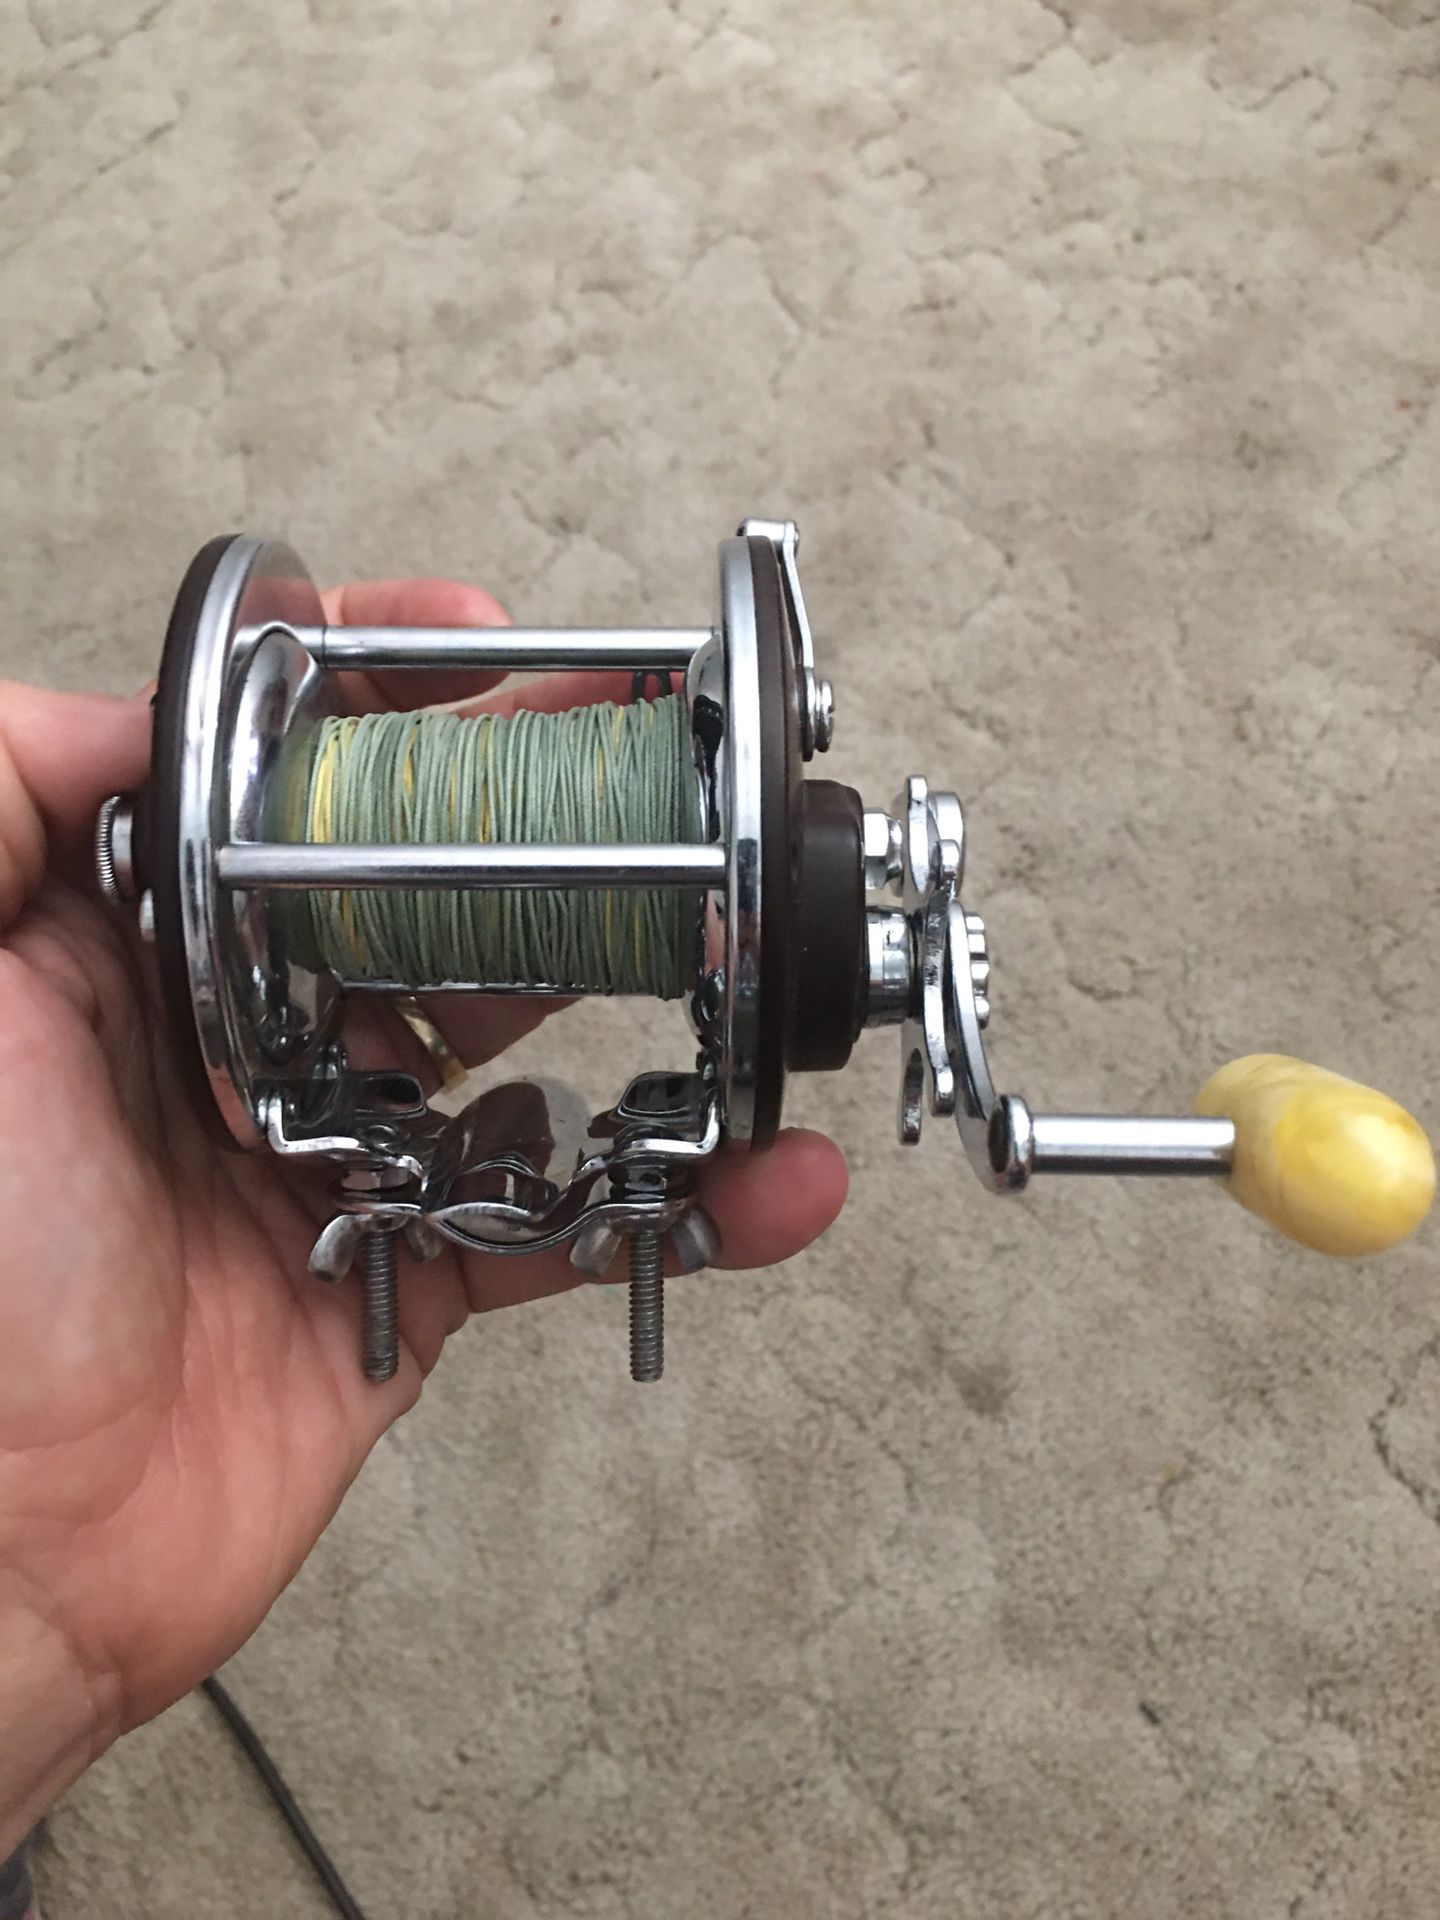 Penn 209 fishing reel with the heavy duty pole mounting bracket ( they use on most deep sea fishing poles)